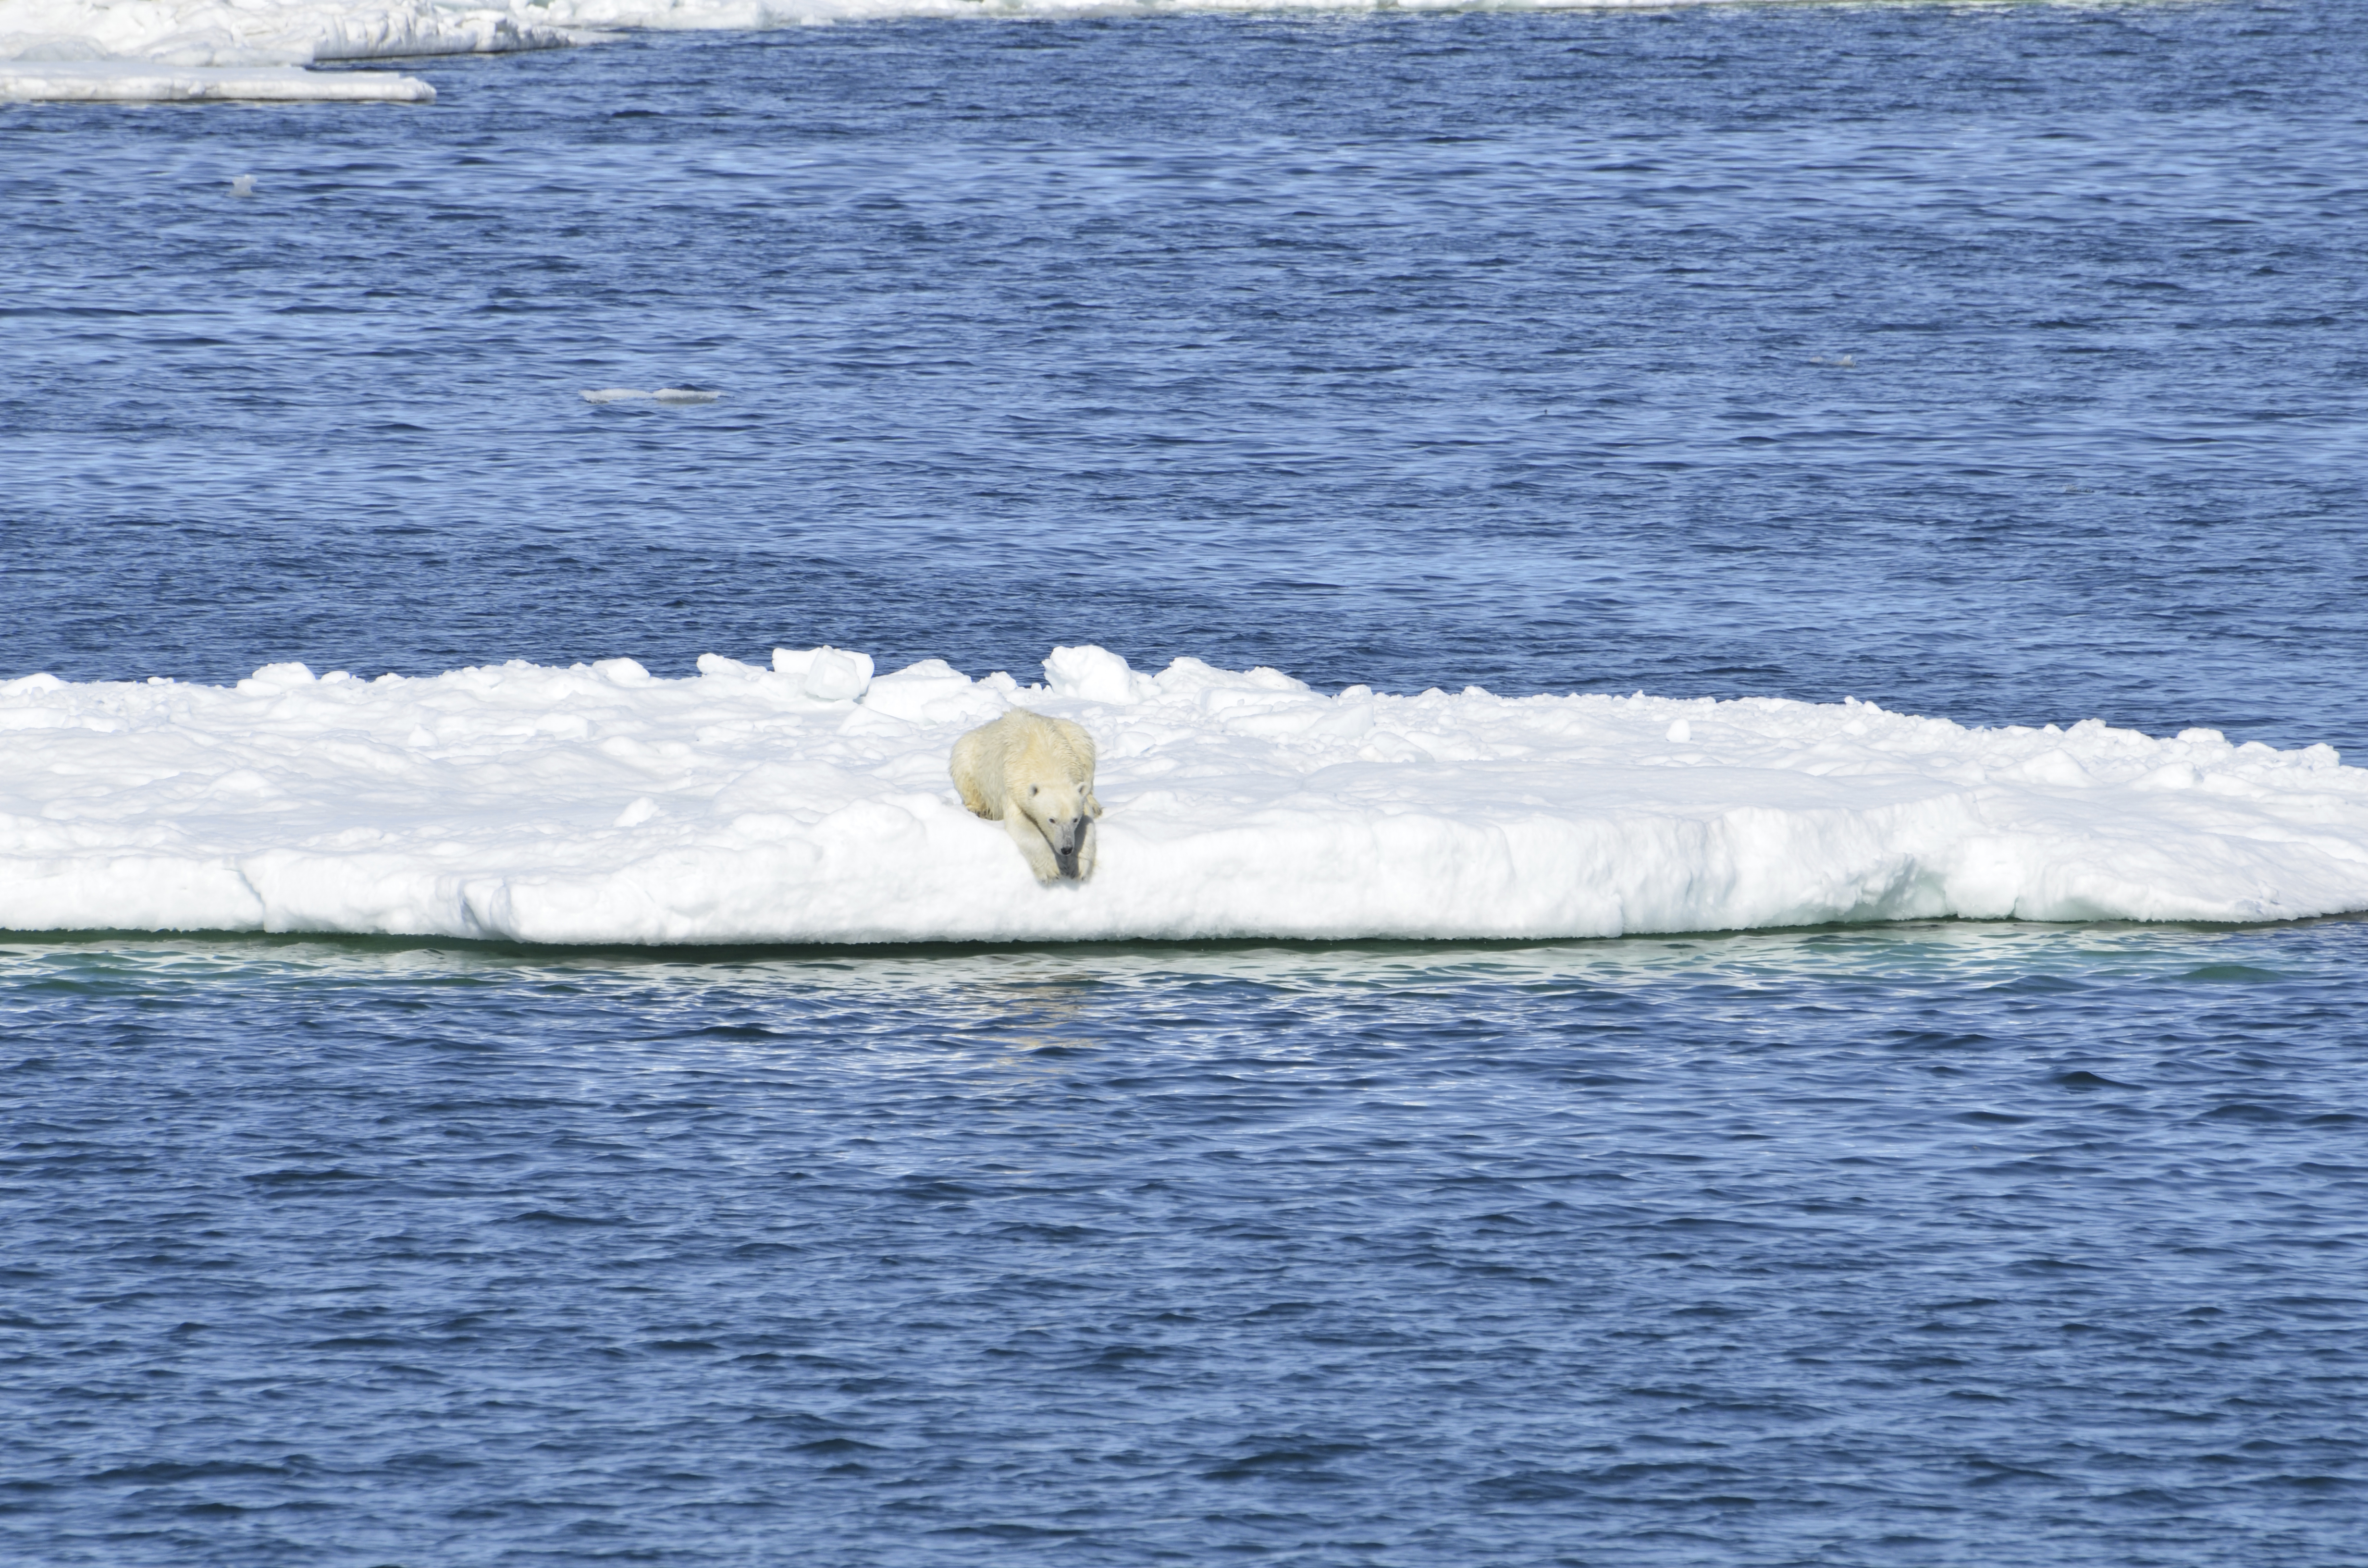 In this June 15, 2014 photo provided by the United States Geological Survey, a polar bear rests on a chunk of sea ice in the Arctic. A new study released on Thursday, Feb. 1, 2018 shows some polar bears in the Arctic are shedding pounds during the time they are supposed to be beefing up. Scientists blame climate change for shrinking the ice cover on the Arctic Ocean that the polar bears need for hunting. (Brian Battaile/USGS via AP)